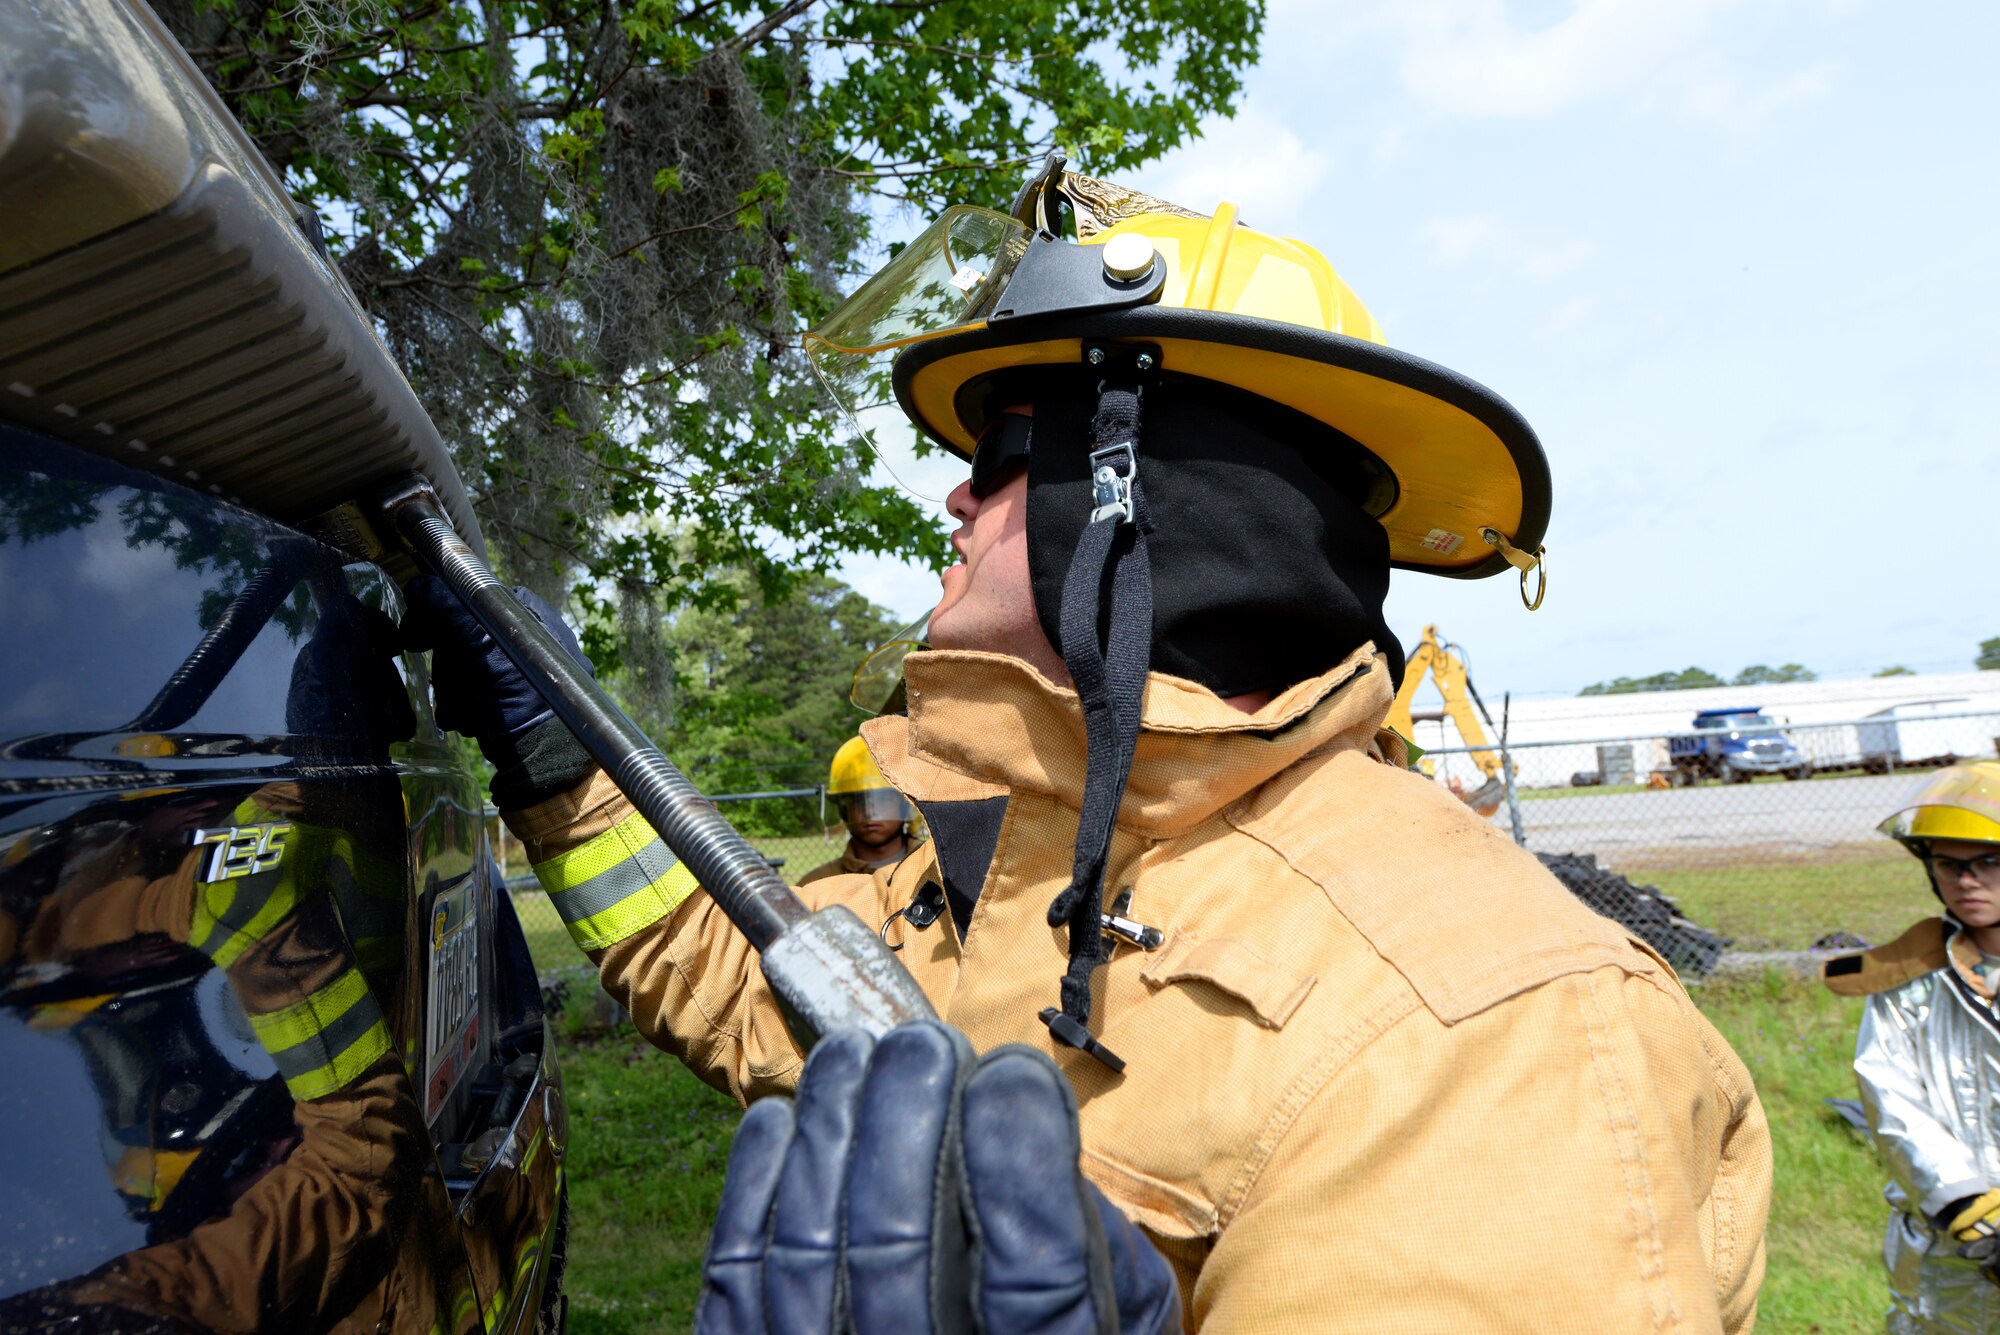 A picture of an airman utilizing a halligan tool to soften a vehicle.